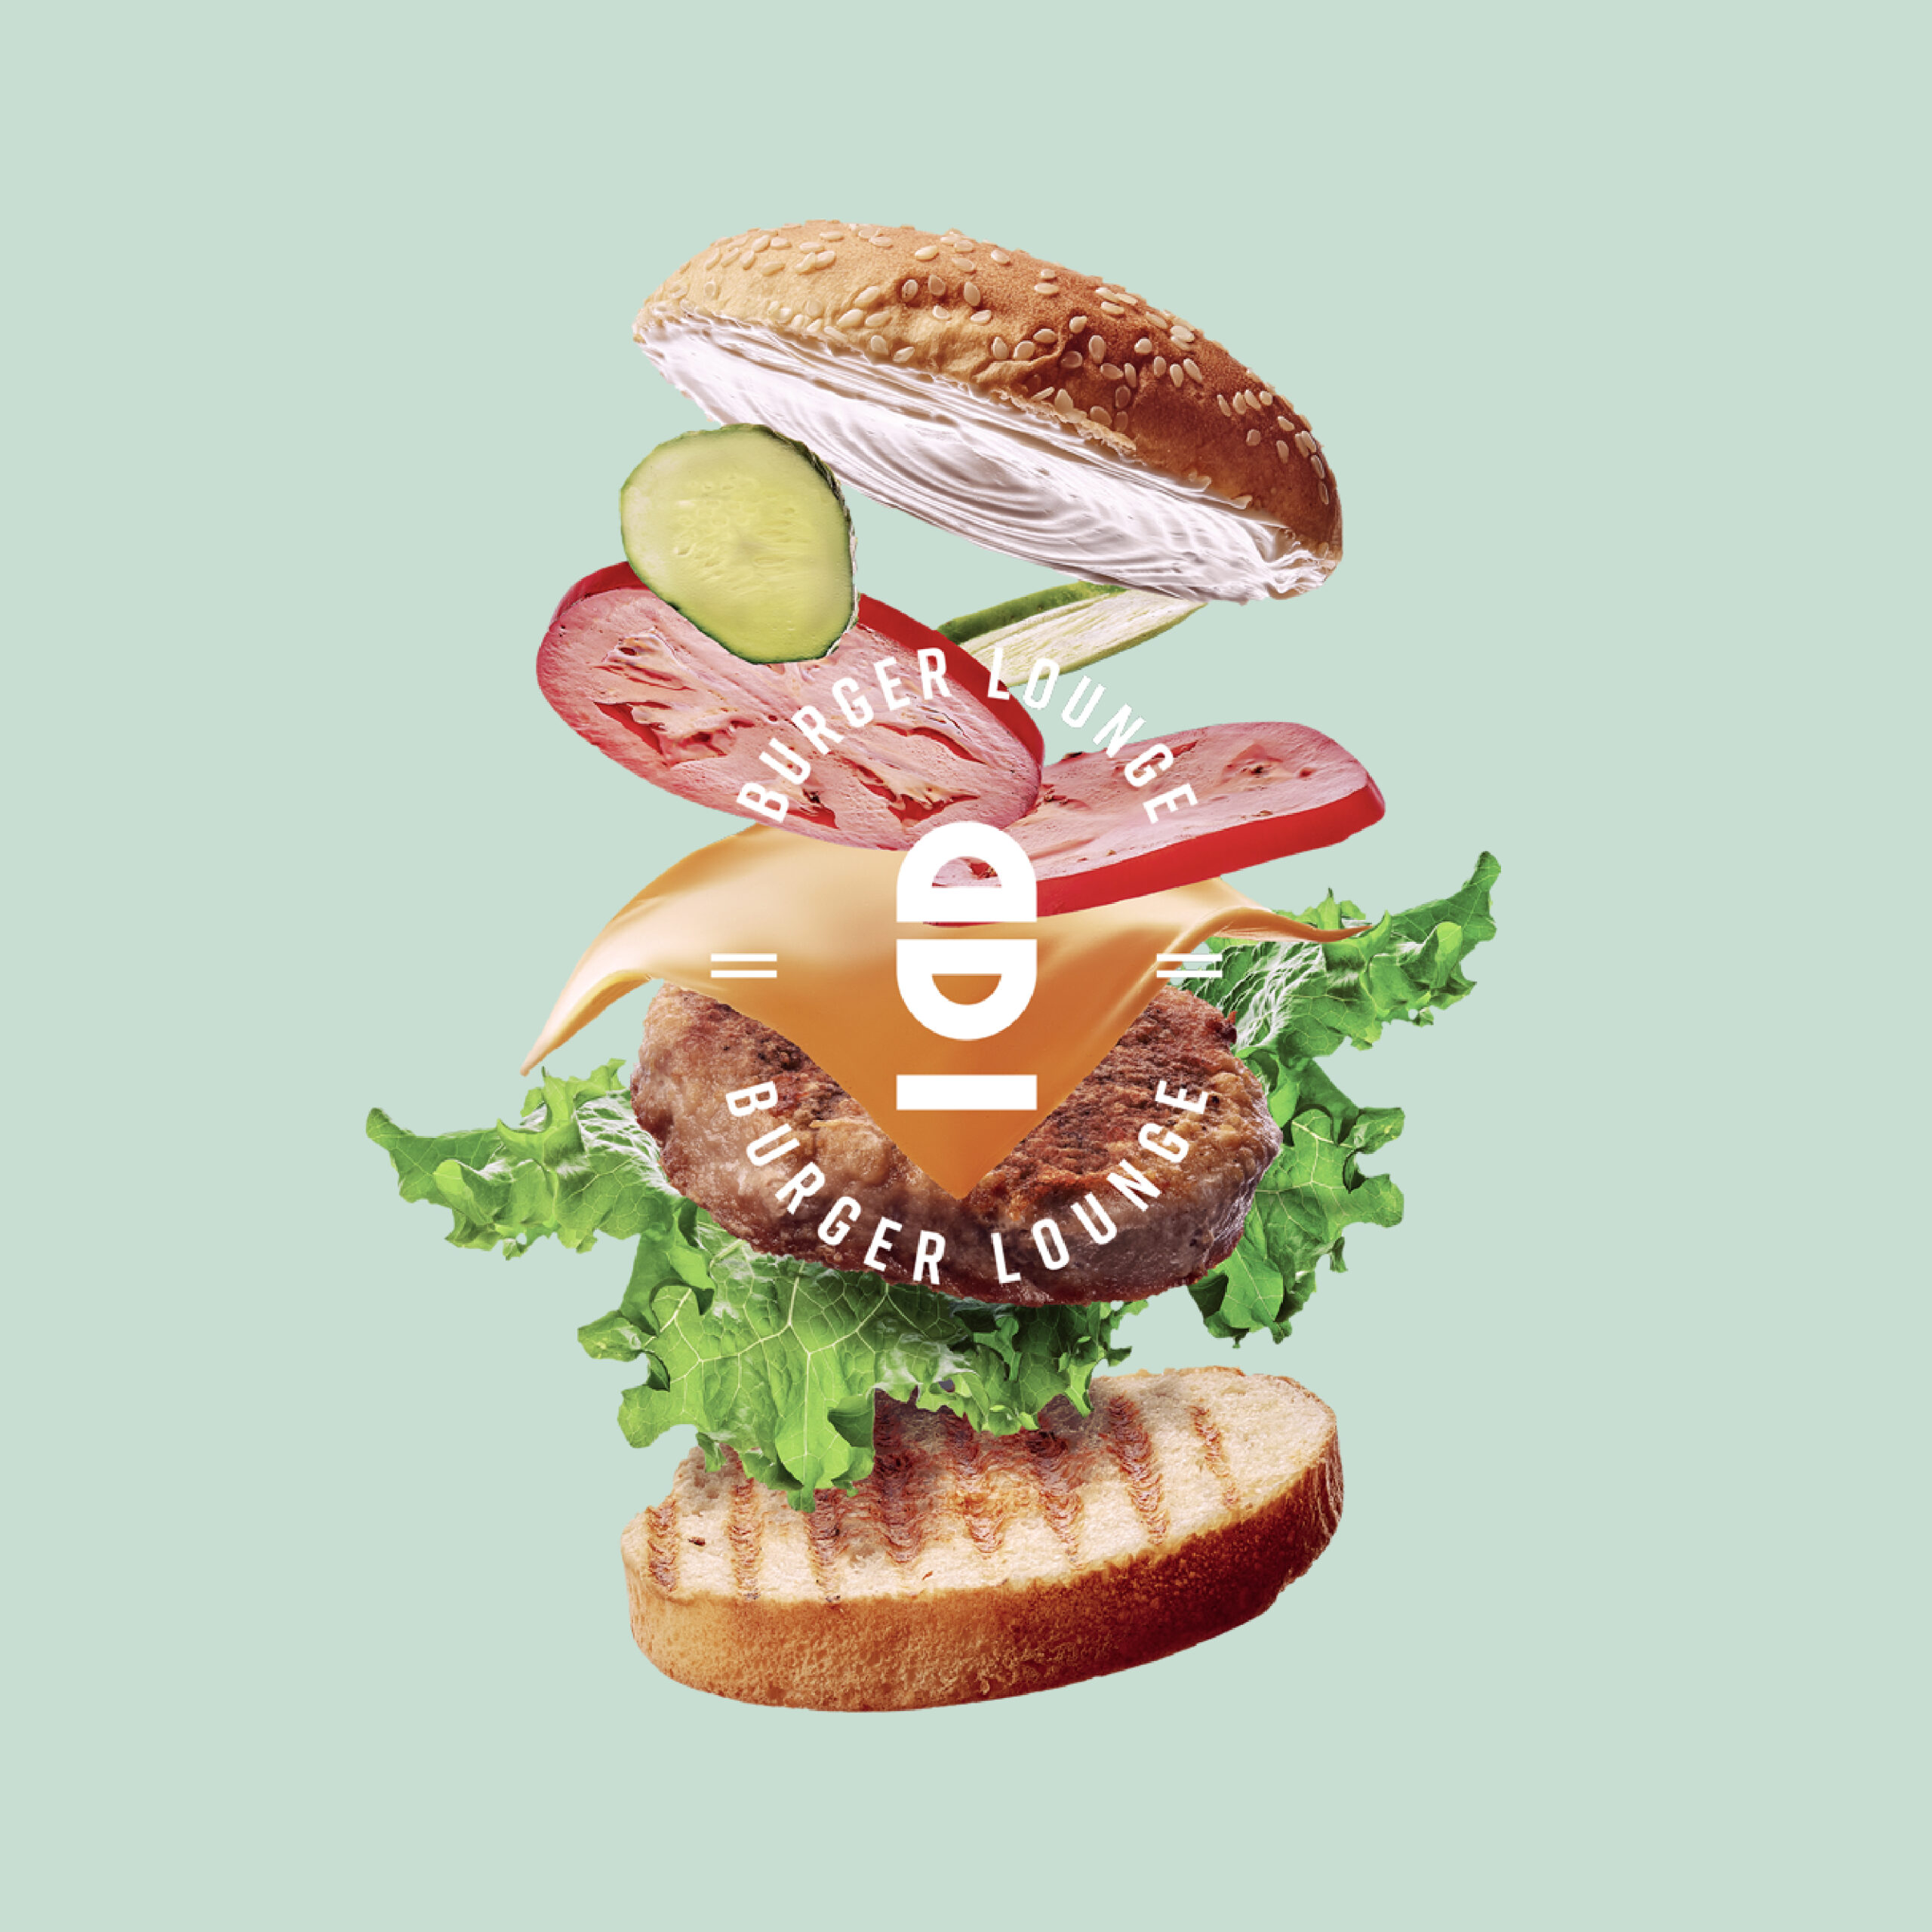 Burger-Lounge-Brand-Facelift-By-Millimeter-Creative-Agency-Cover